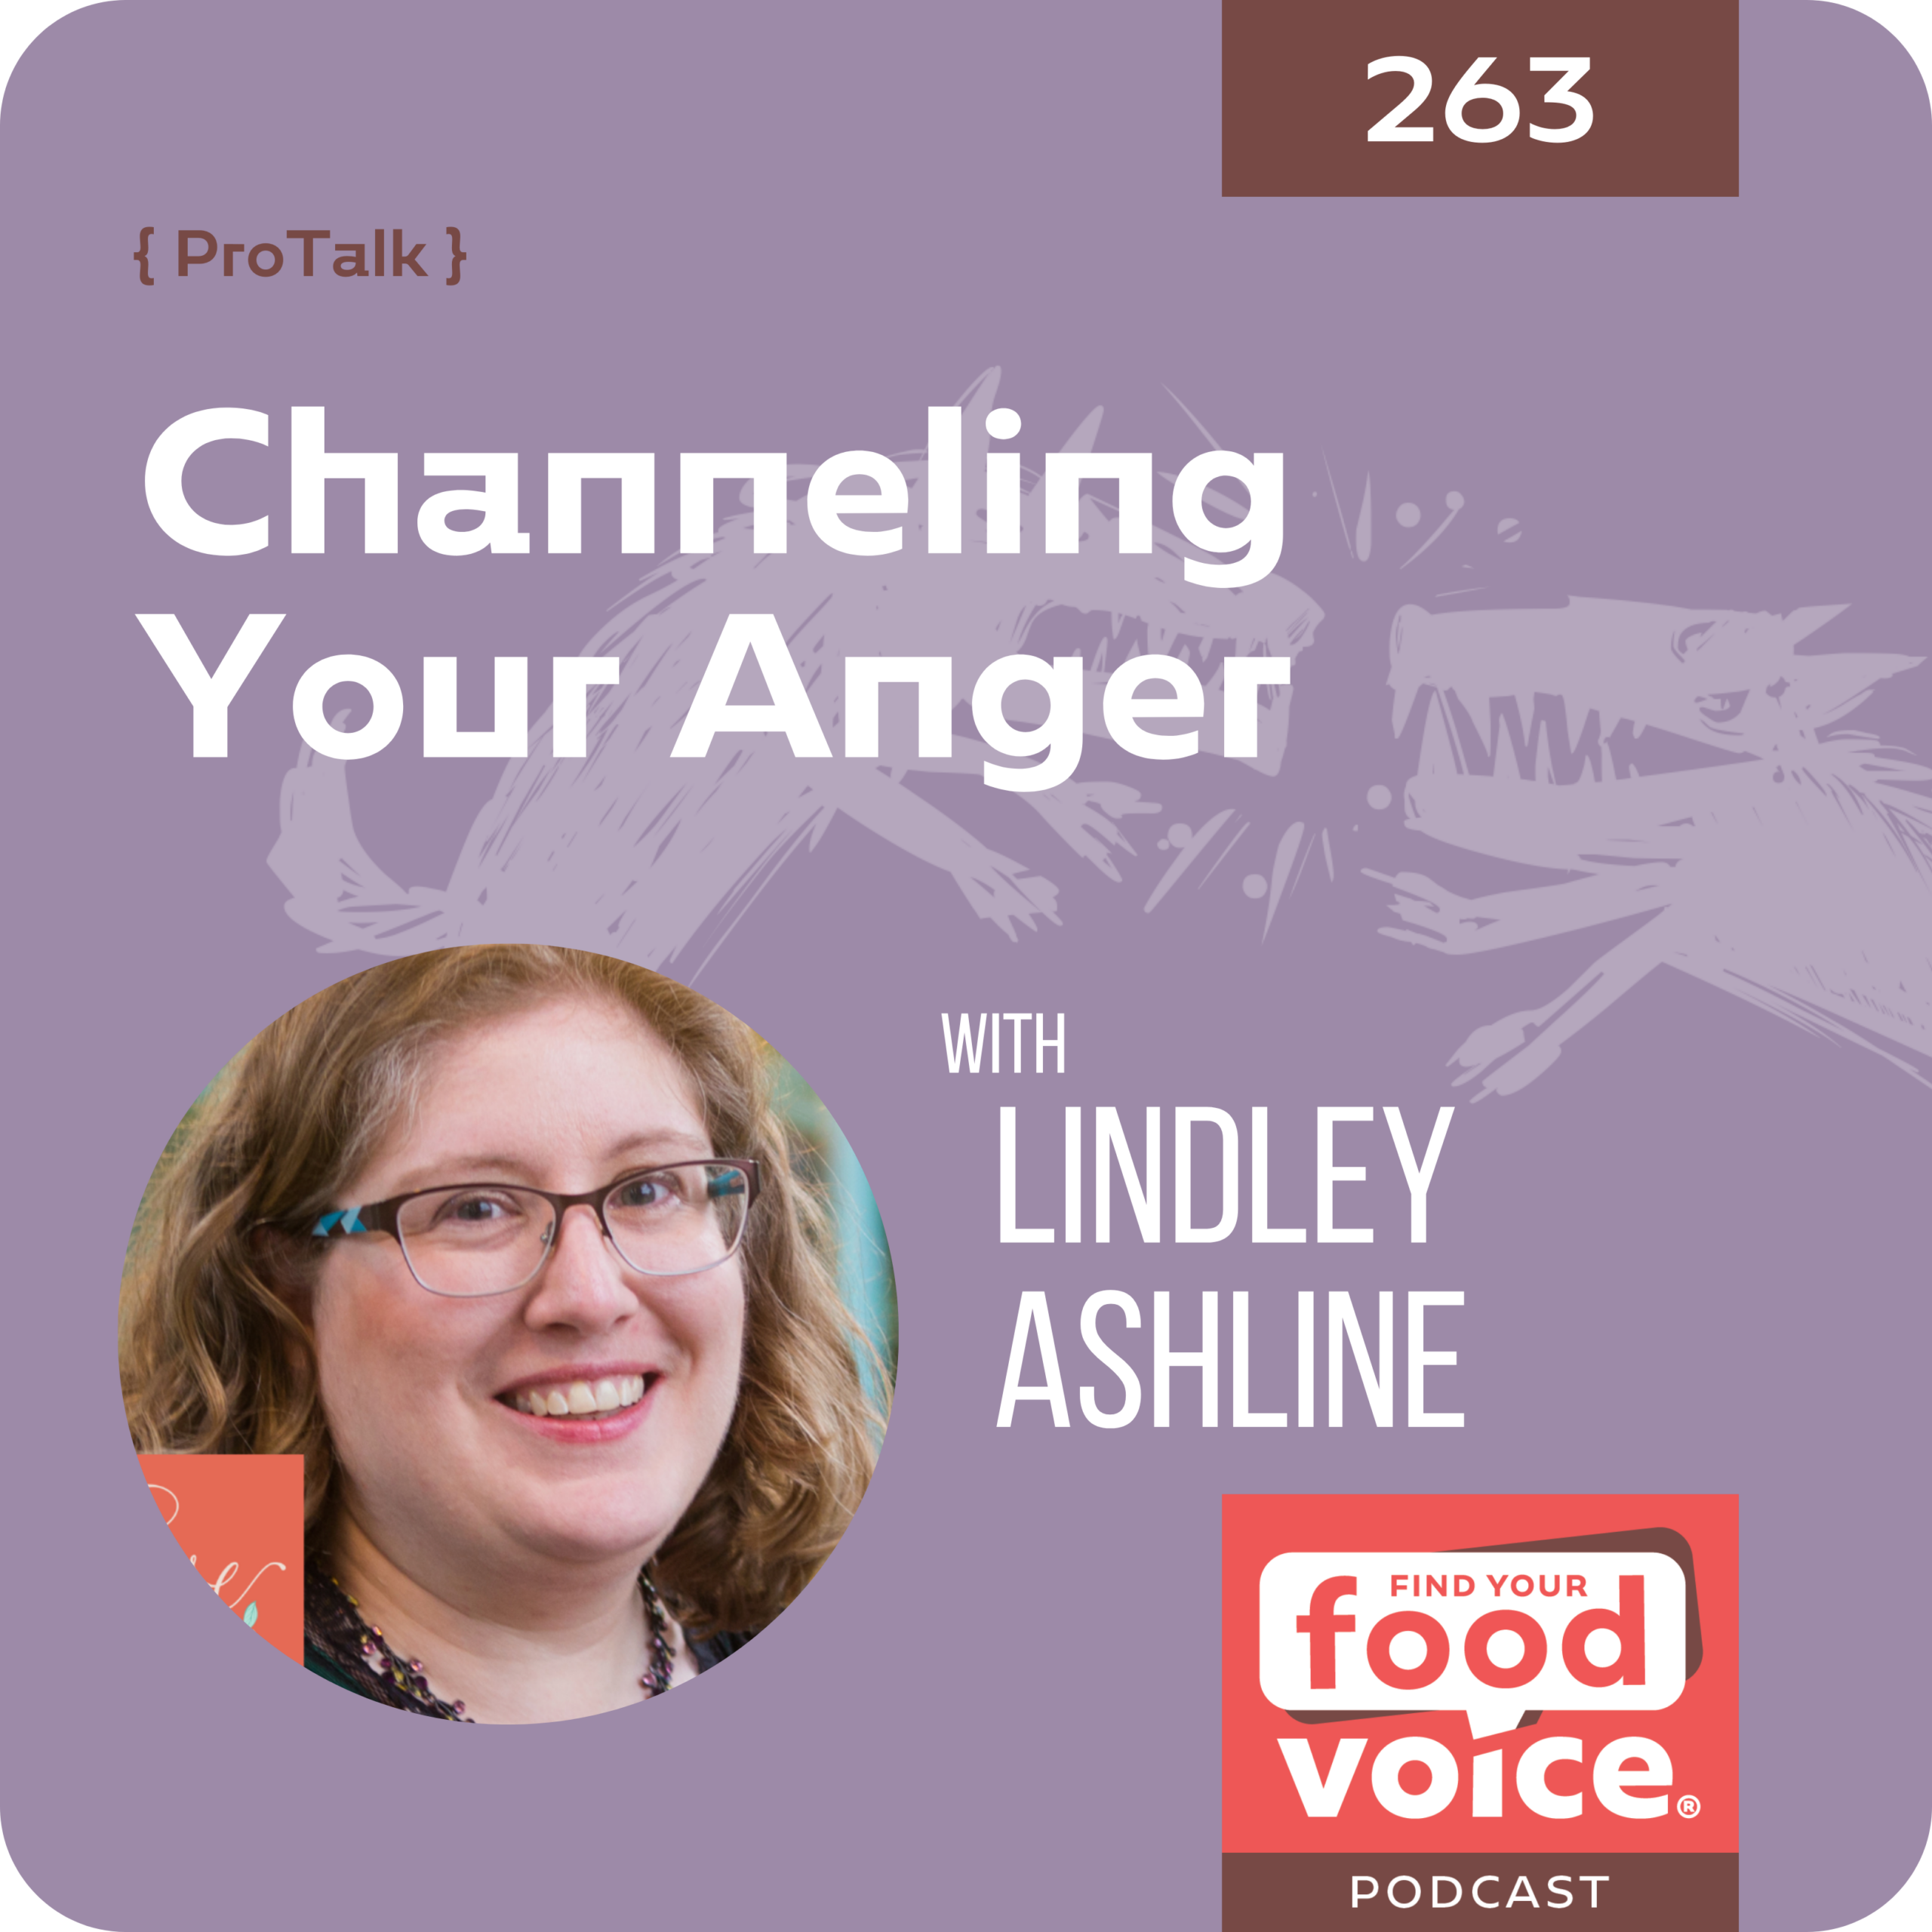 (263) Channeling Your Anger with Lindley Ashline